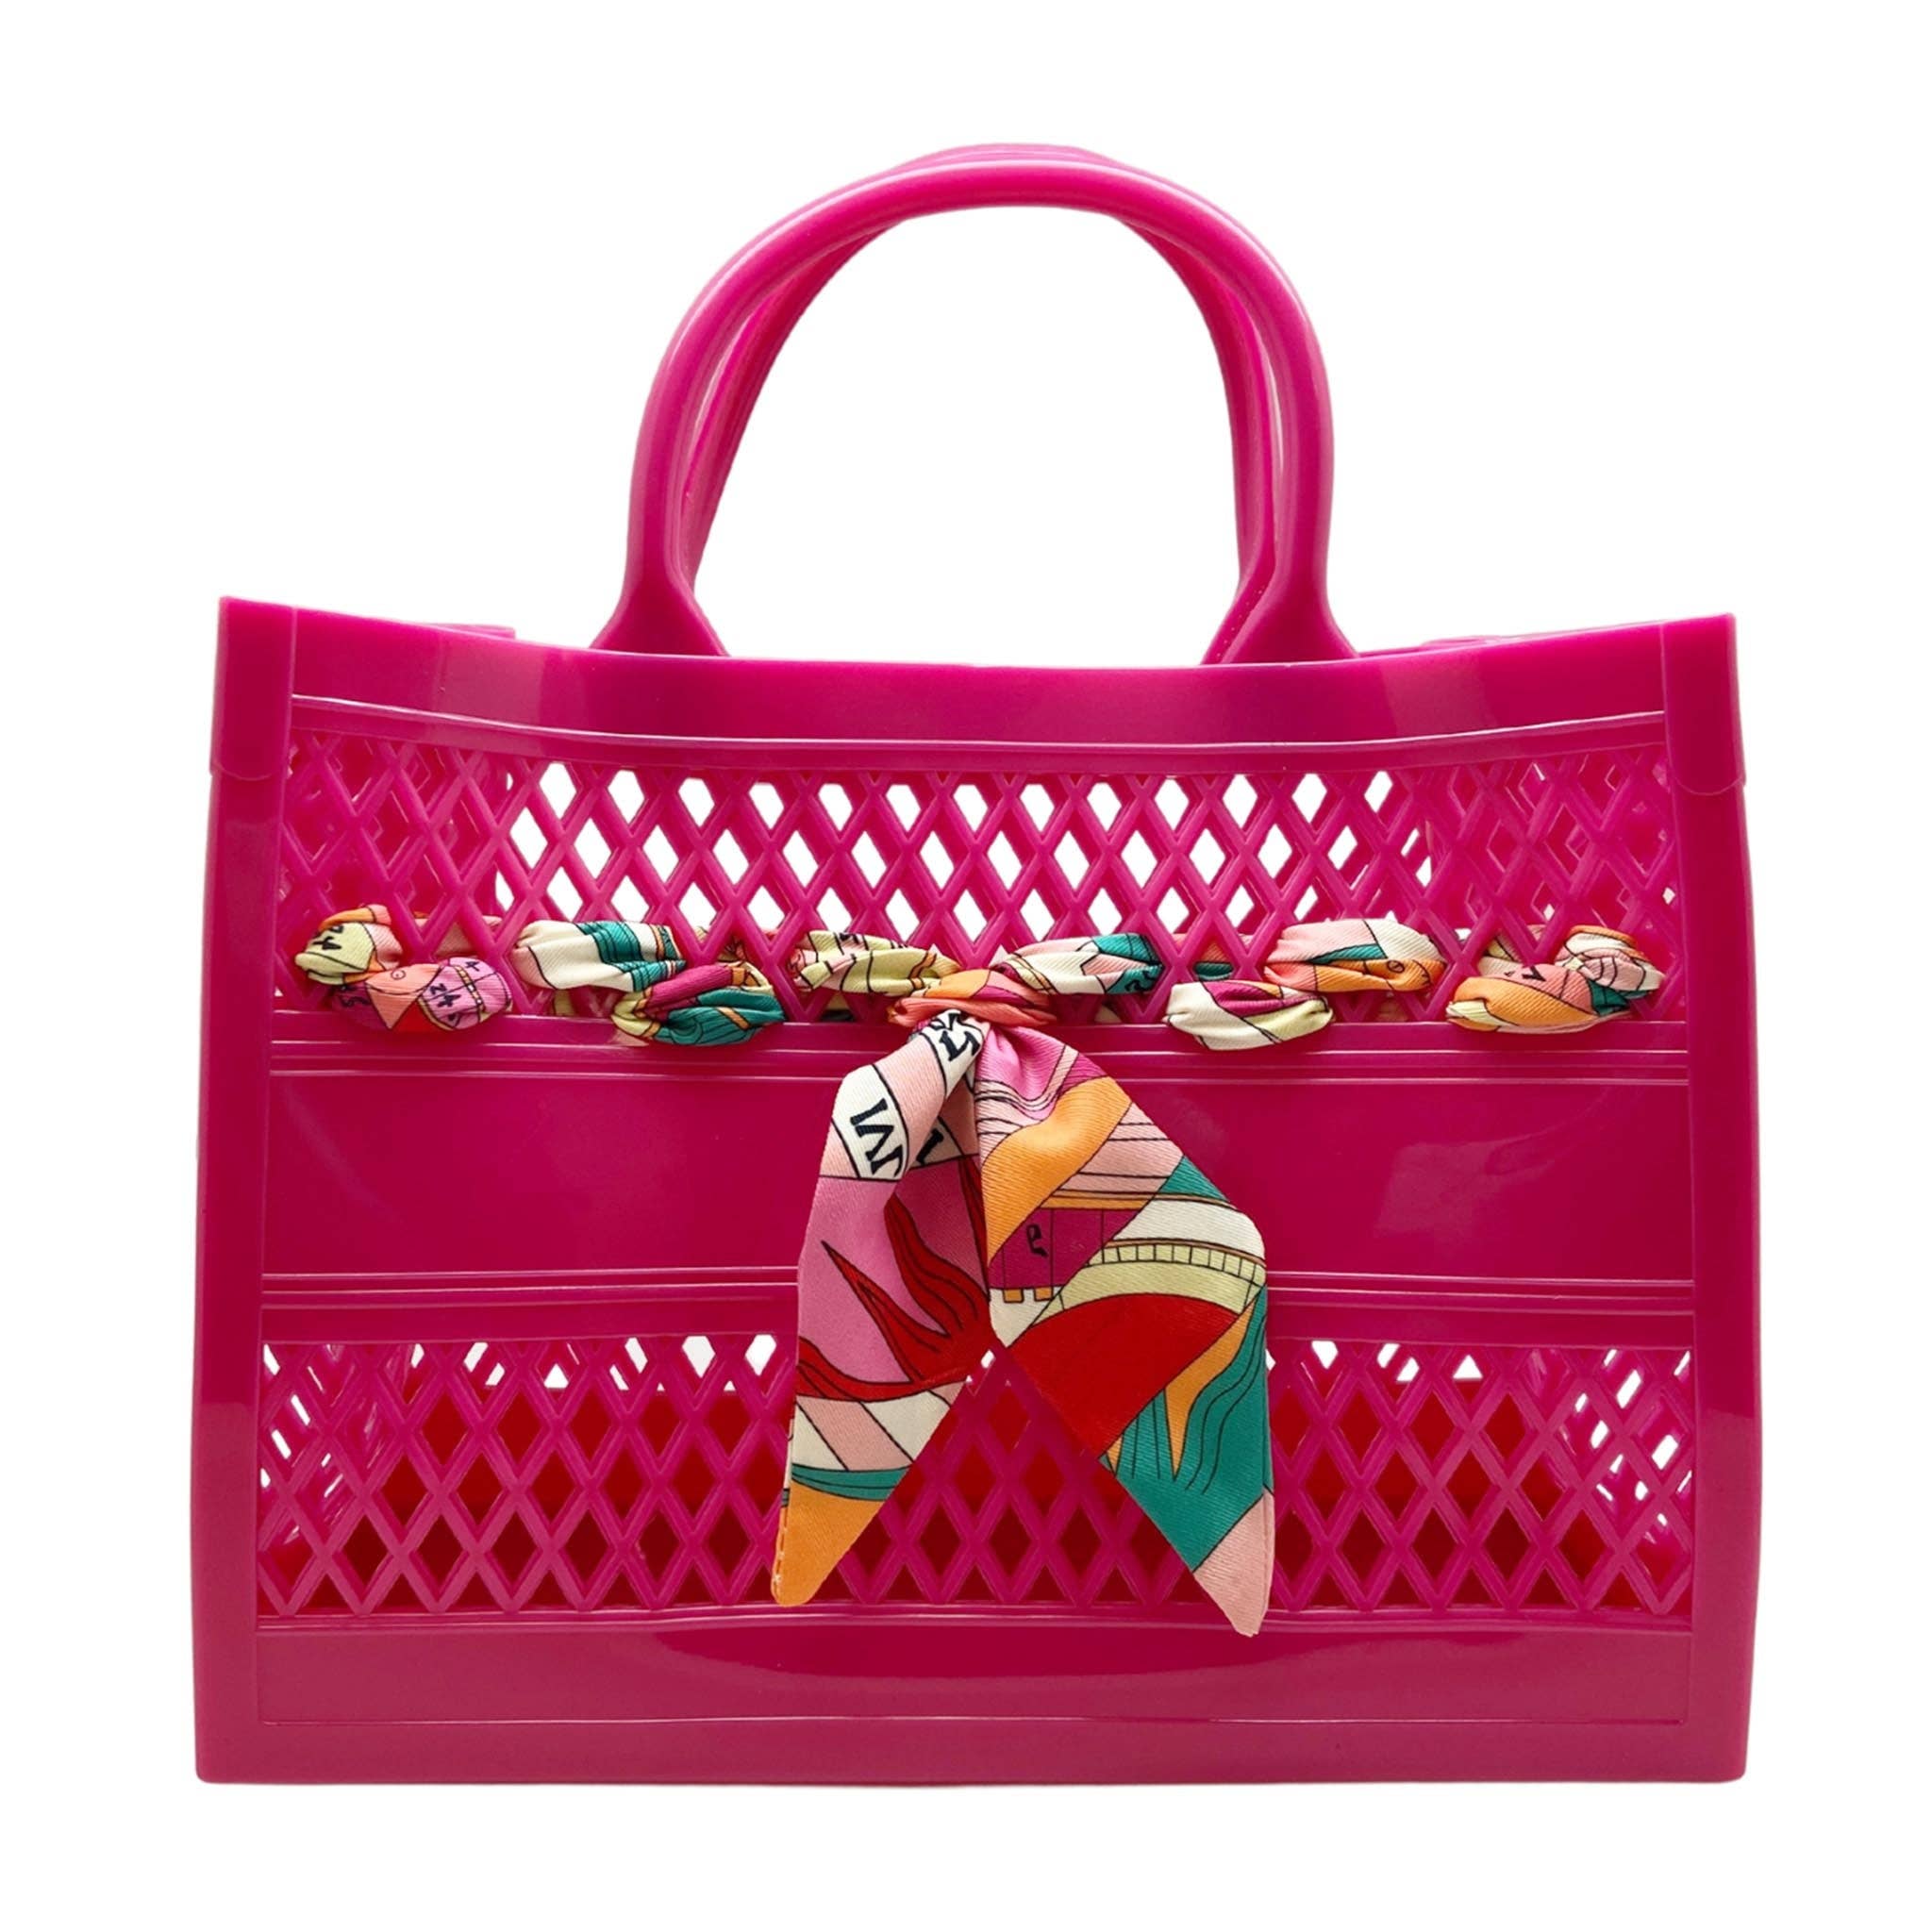 Hot Pink Soleil Jelly Tote w/ Scarf